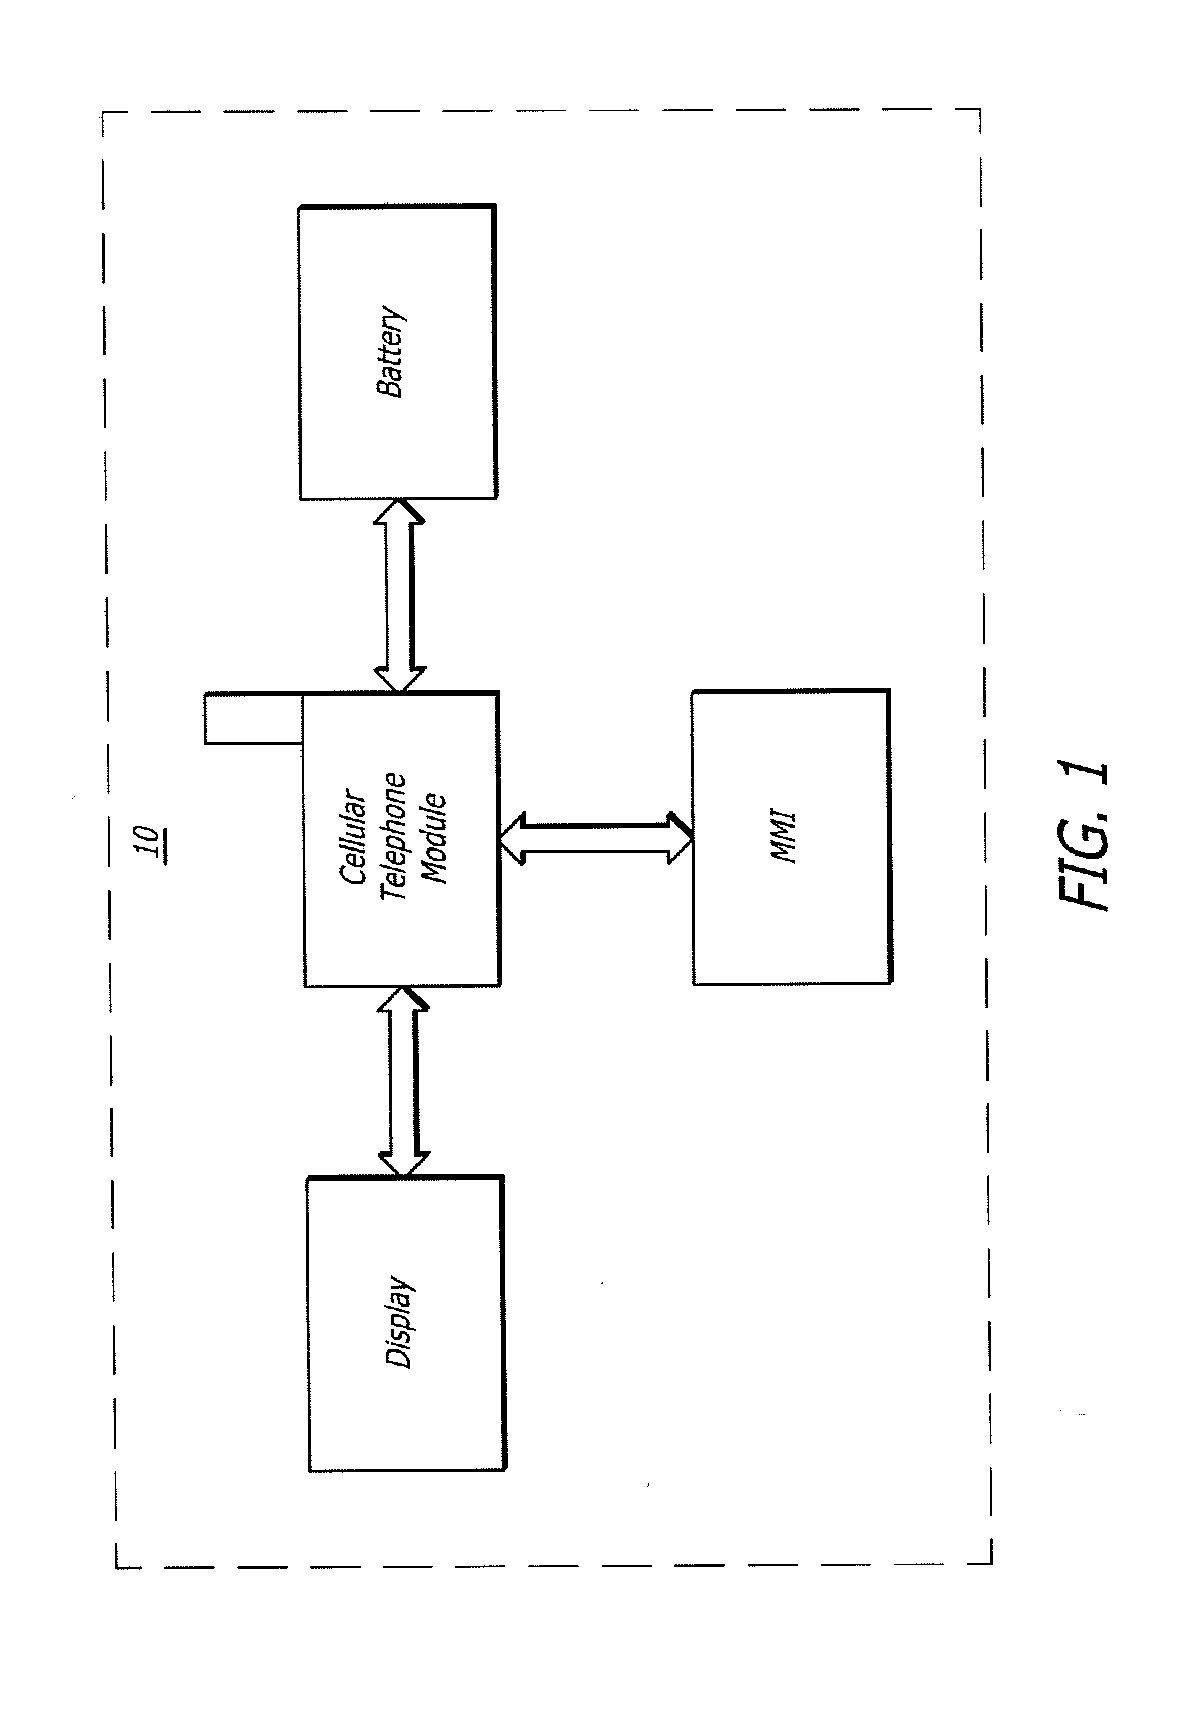 Personal electronic device with a dual core processor